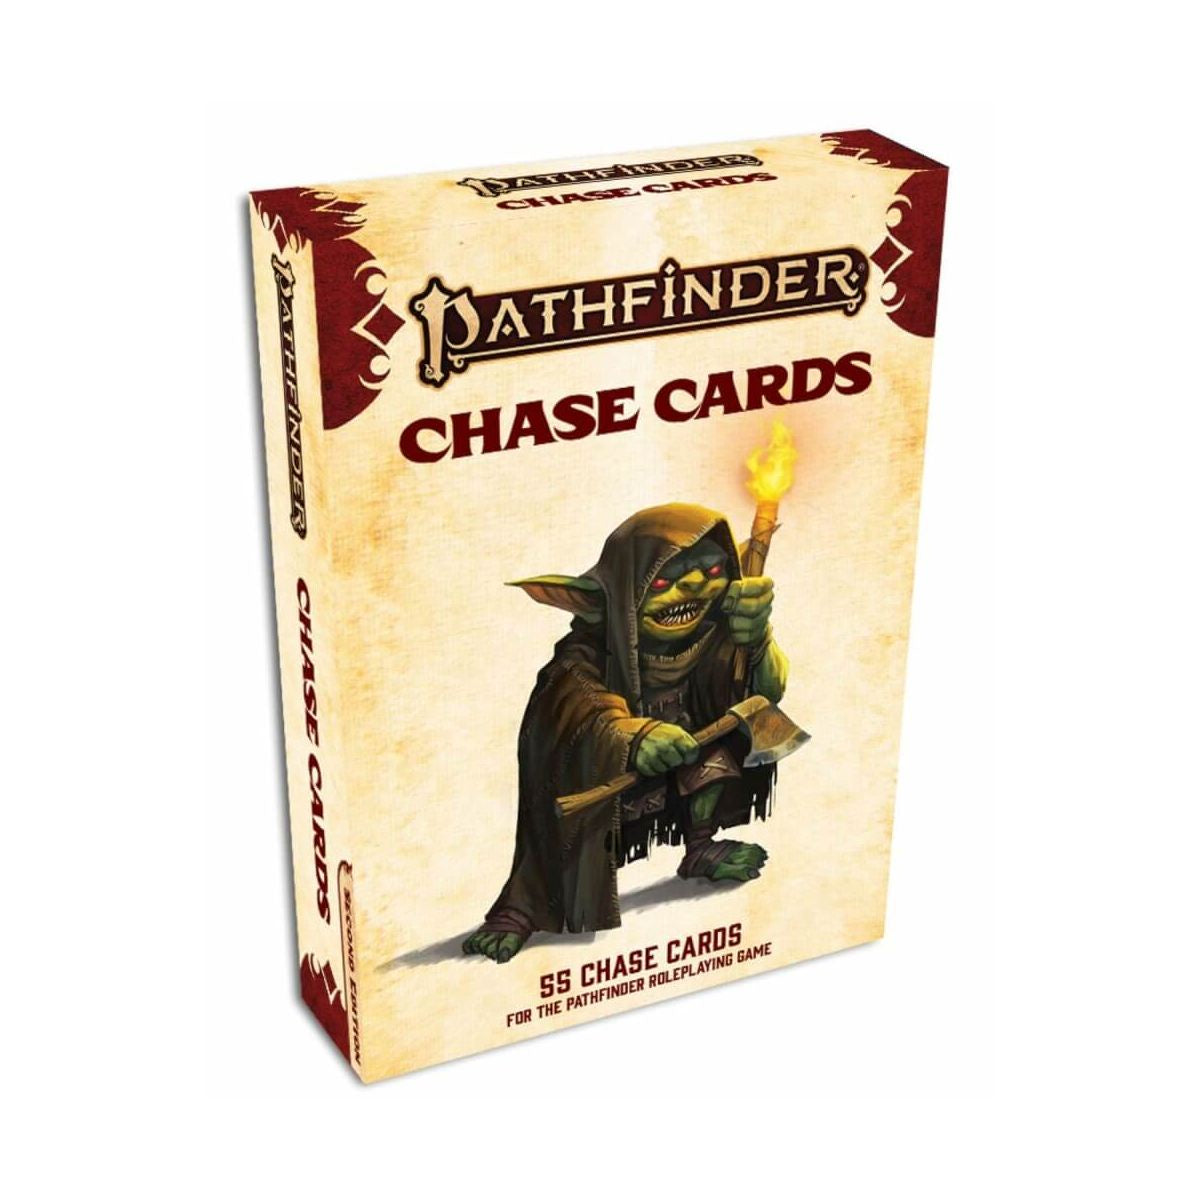 Pathfinder Second Edition Chase Cards Deck